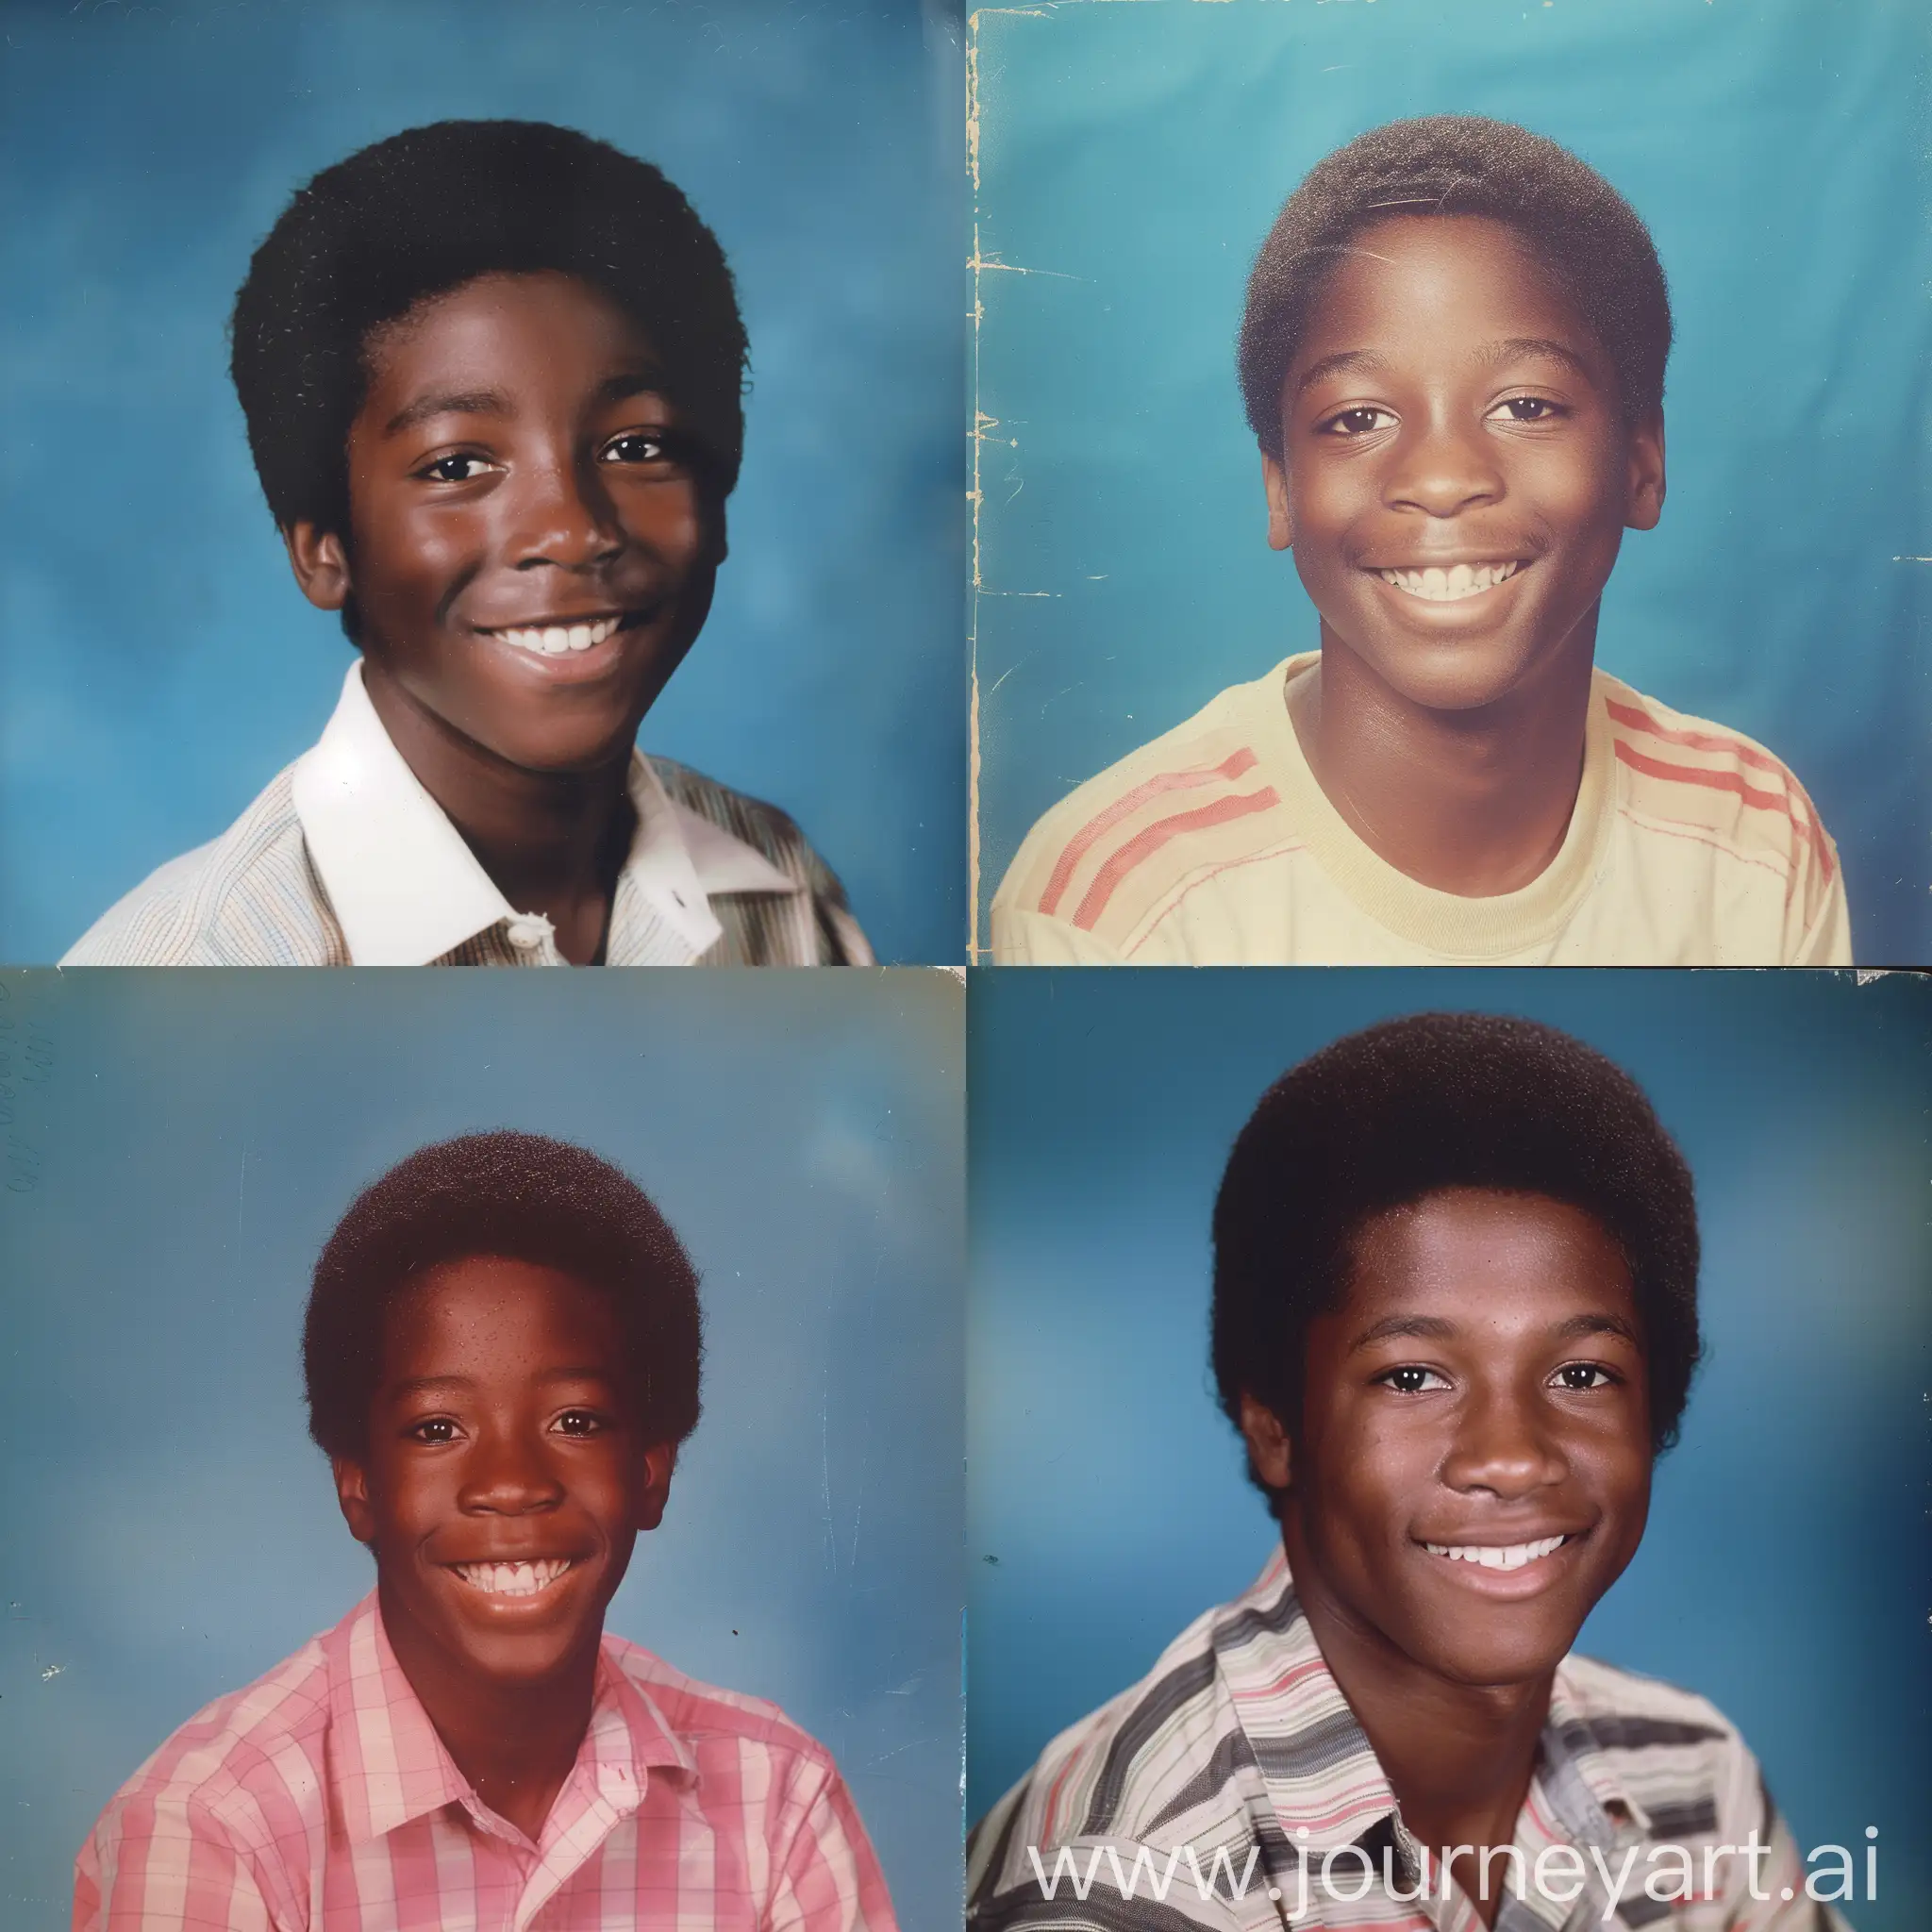 1980s-School-Yearbook-Photograph-of-Smiling-Black-Teen-with-Blue-Background